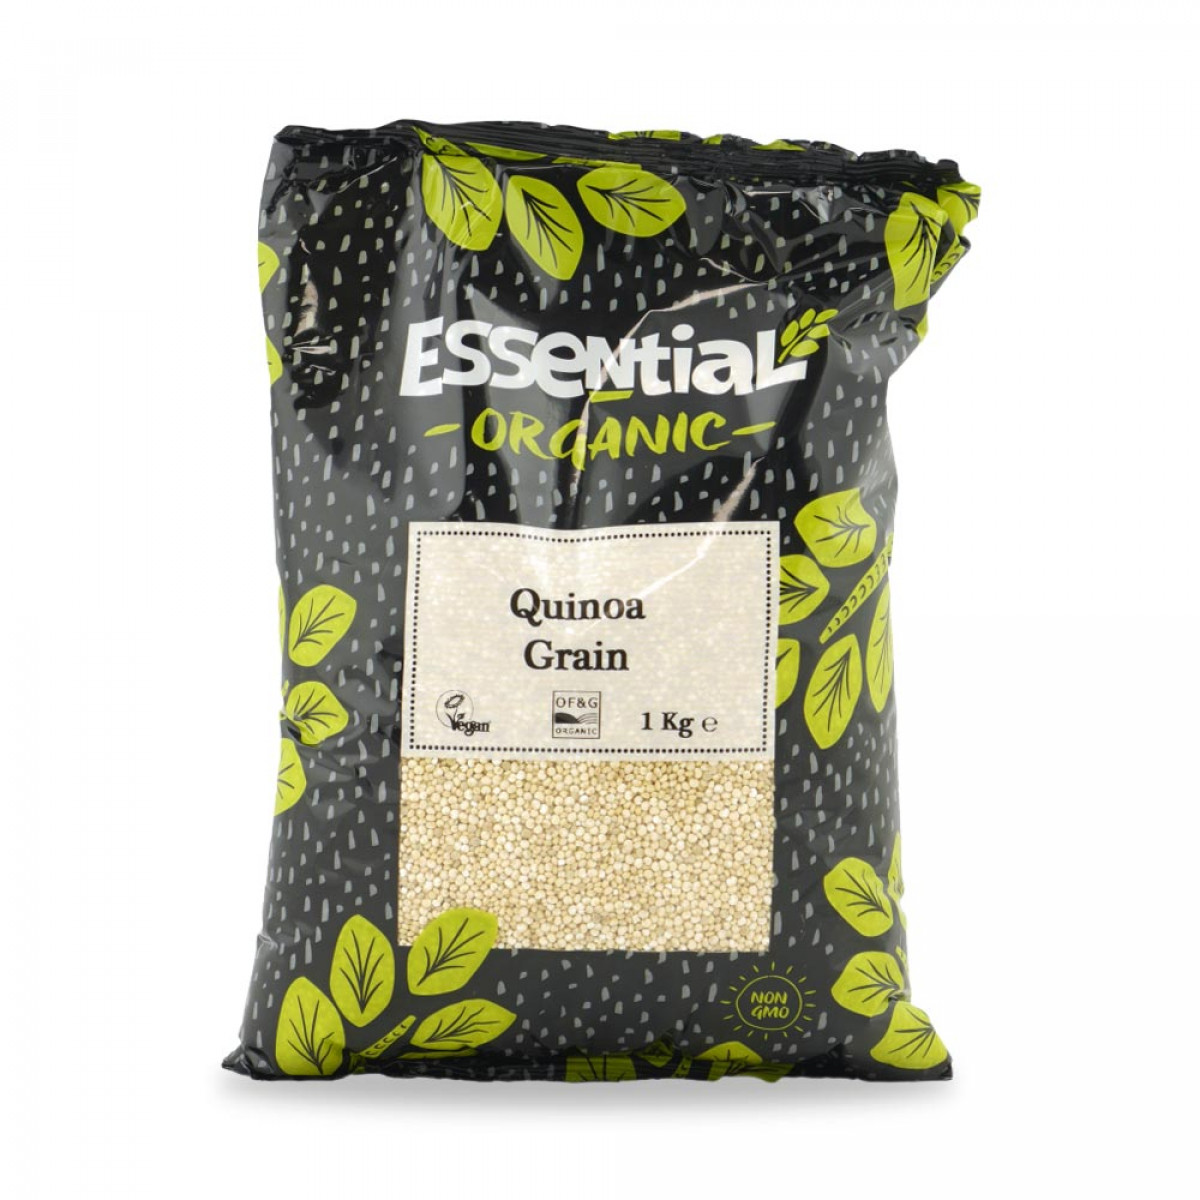 Product picture for Quinoa